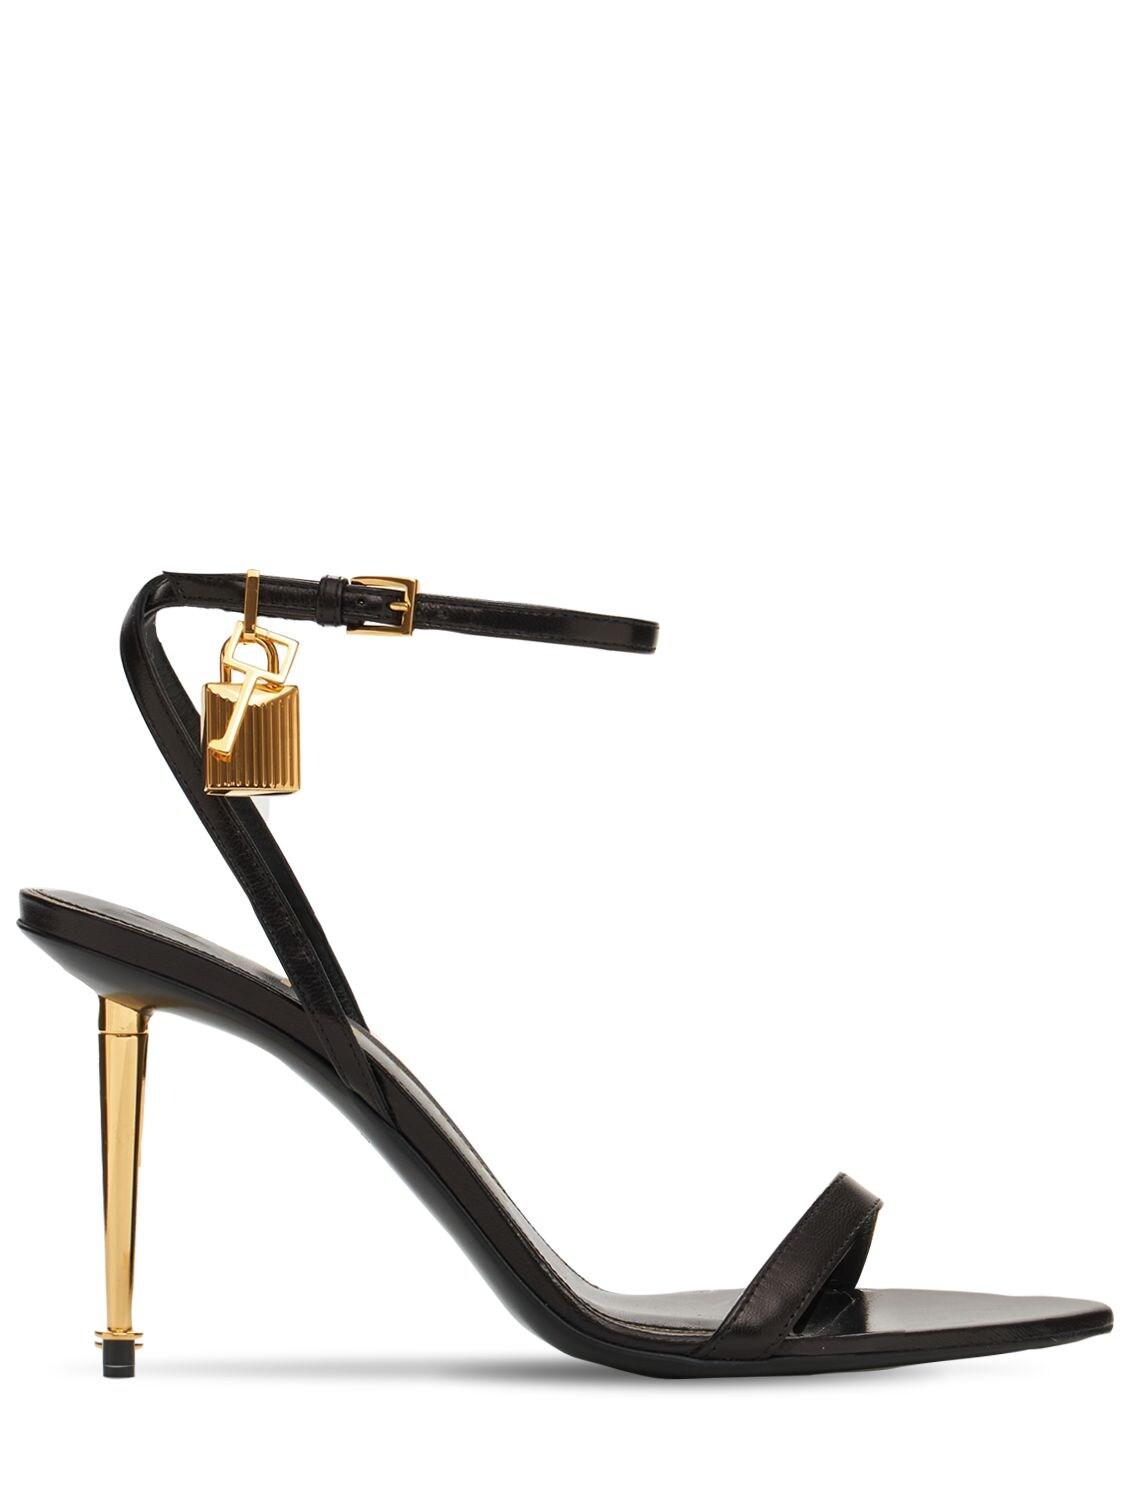 Tom Ford 85mm Padlock Leather Sandals in Black | Lyst